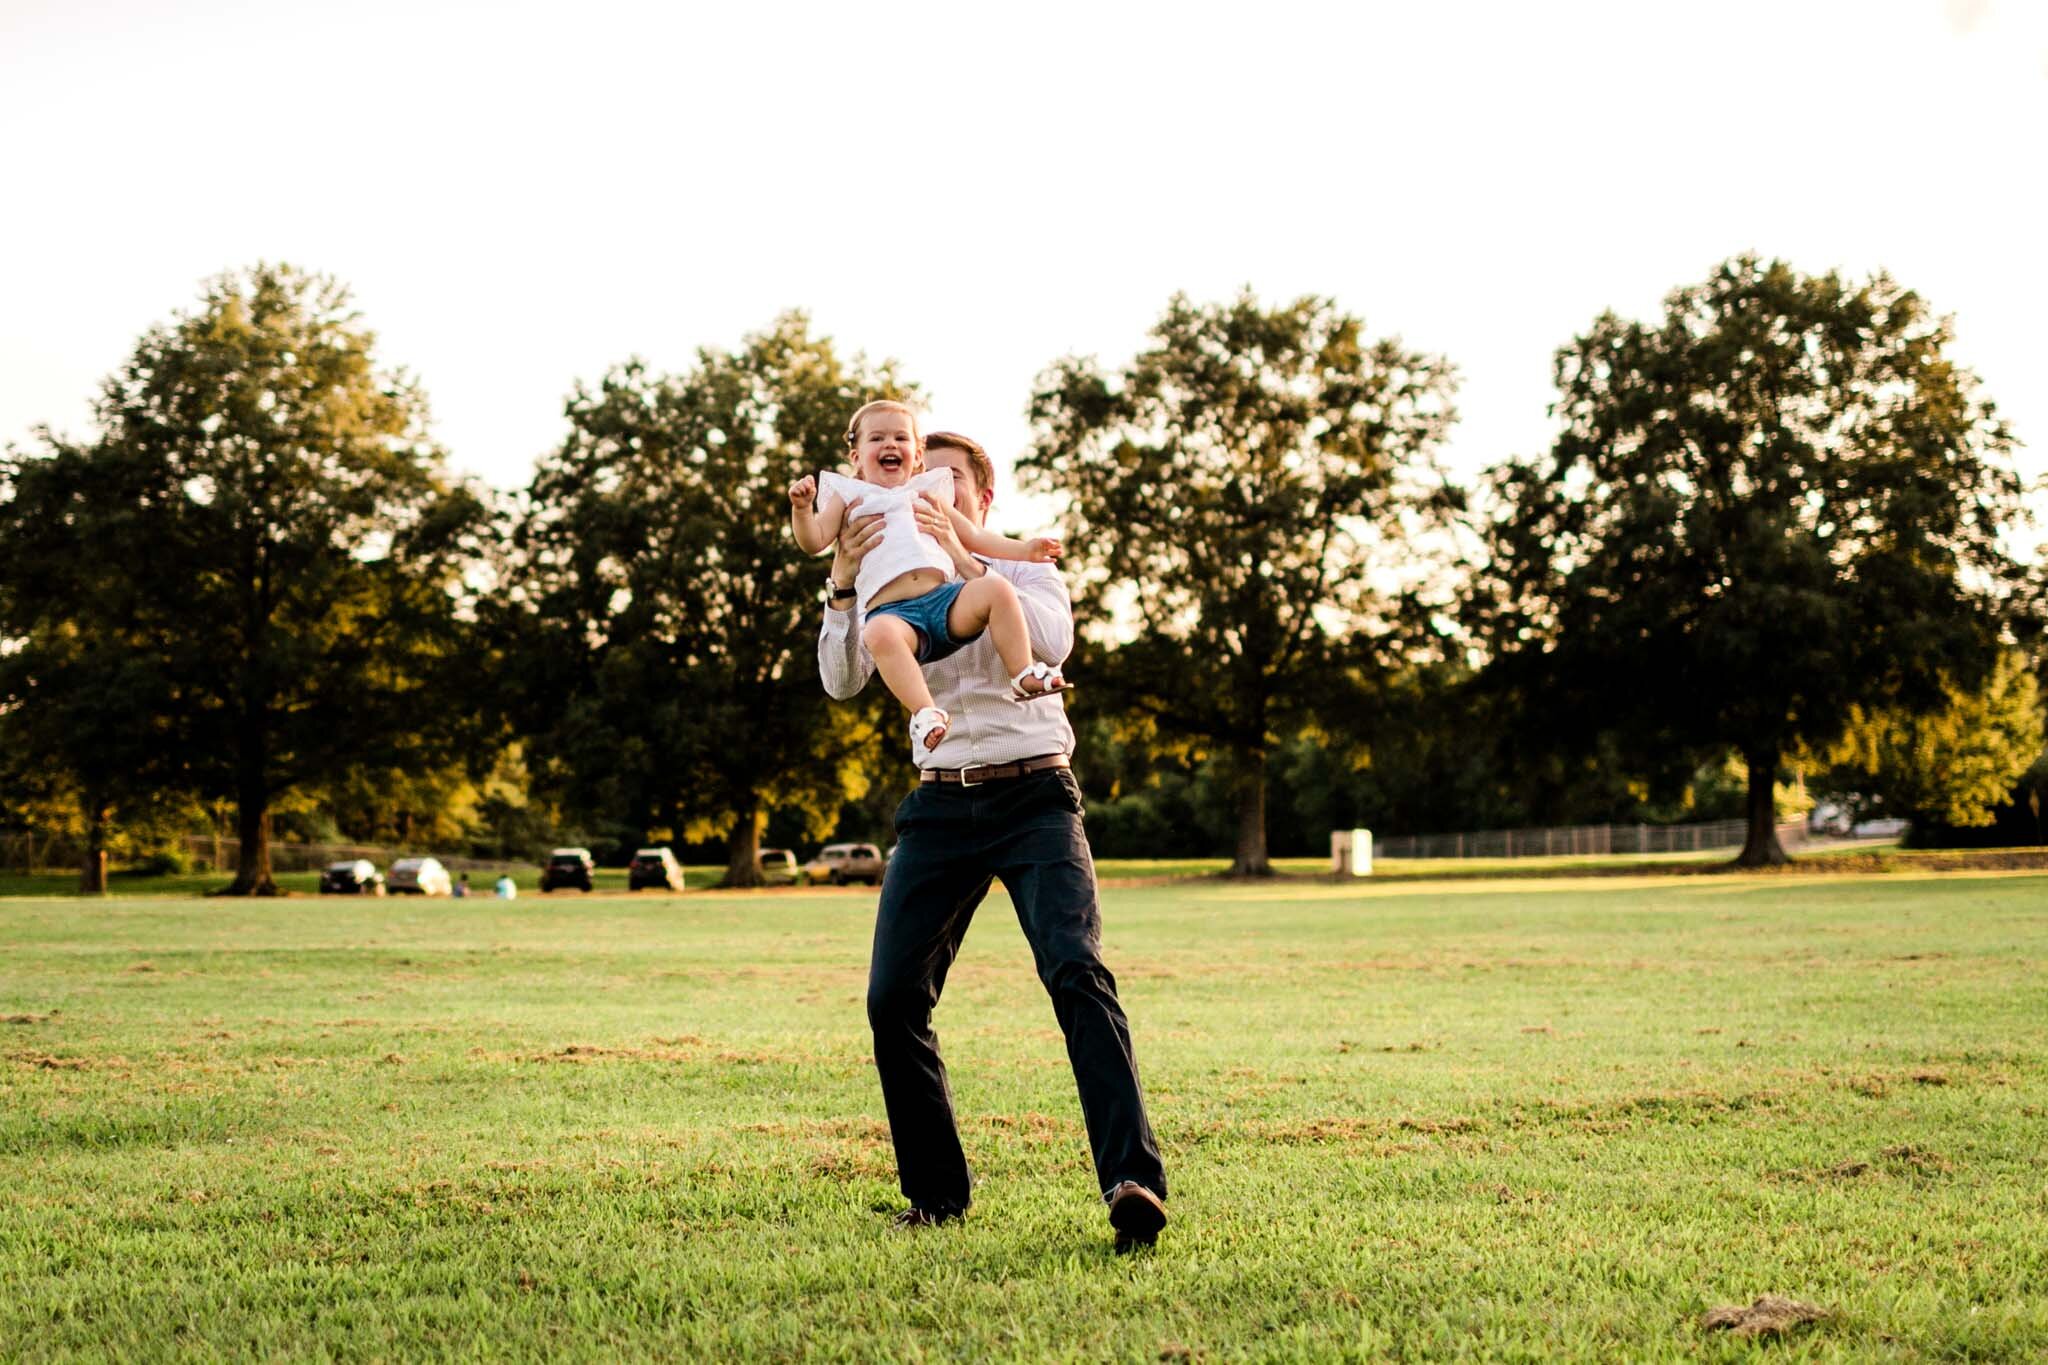 Raleigh Family Photography at Dix Park | By G. Lin Photography | Dad throwing daughter in the air